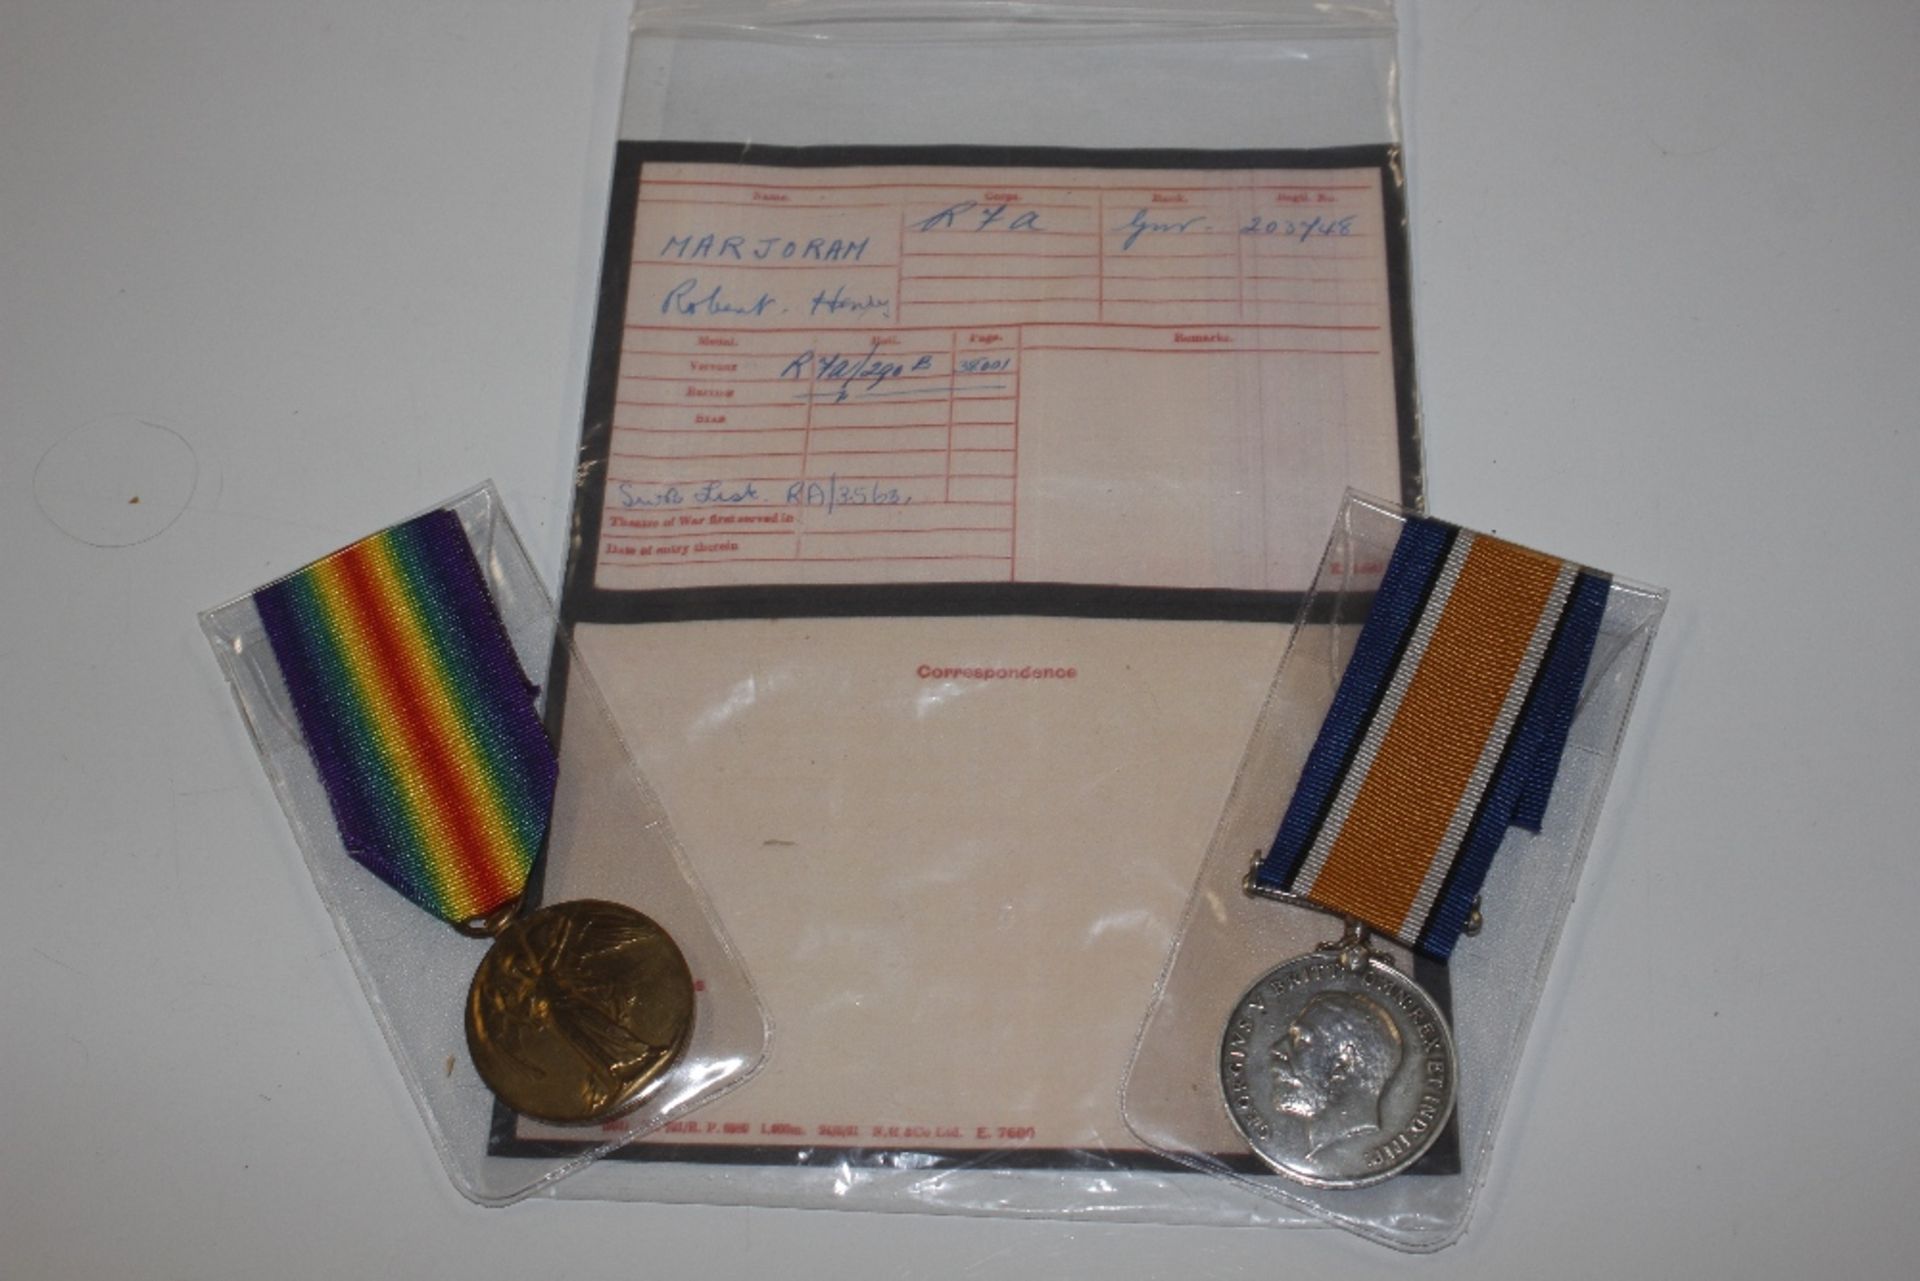 BWM and Victory medals to 203748 Gnr R.H. Marjoram